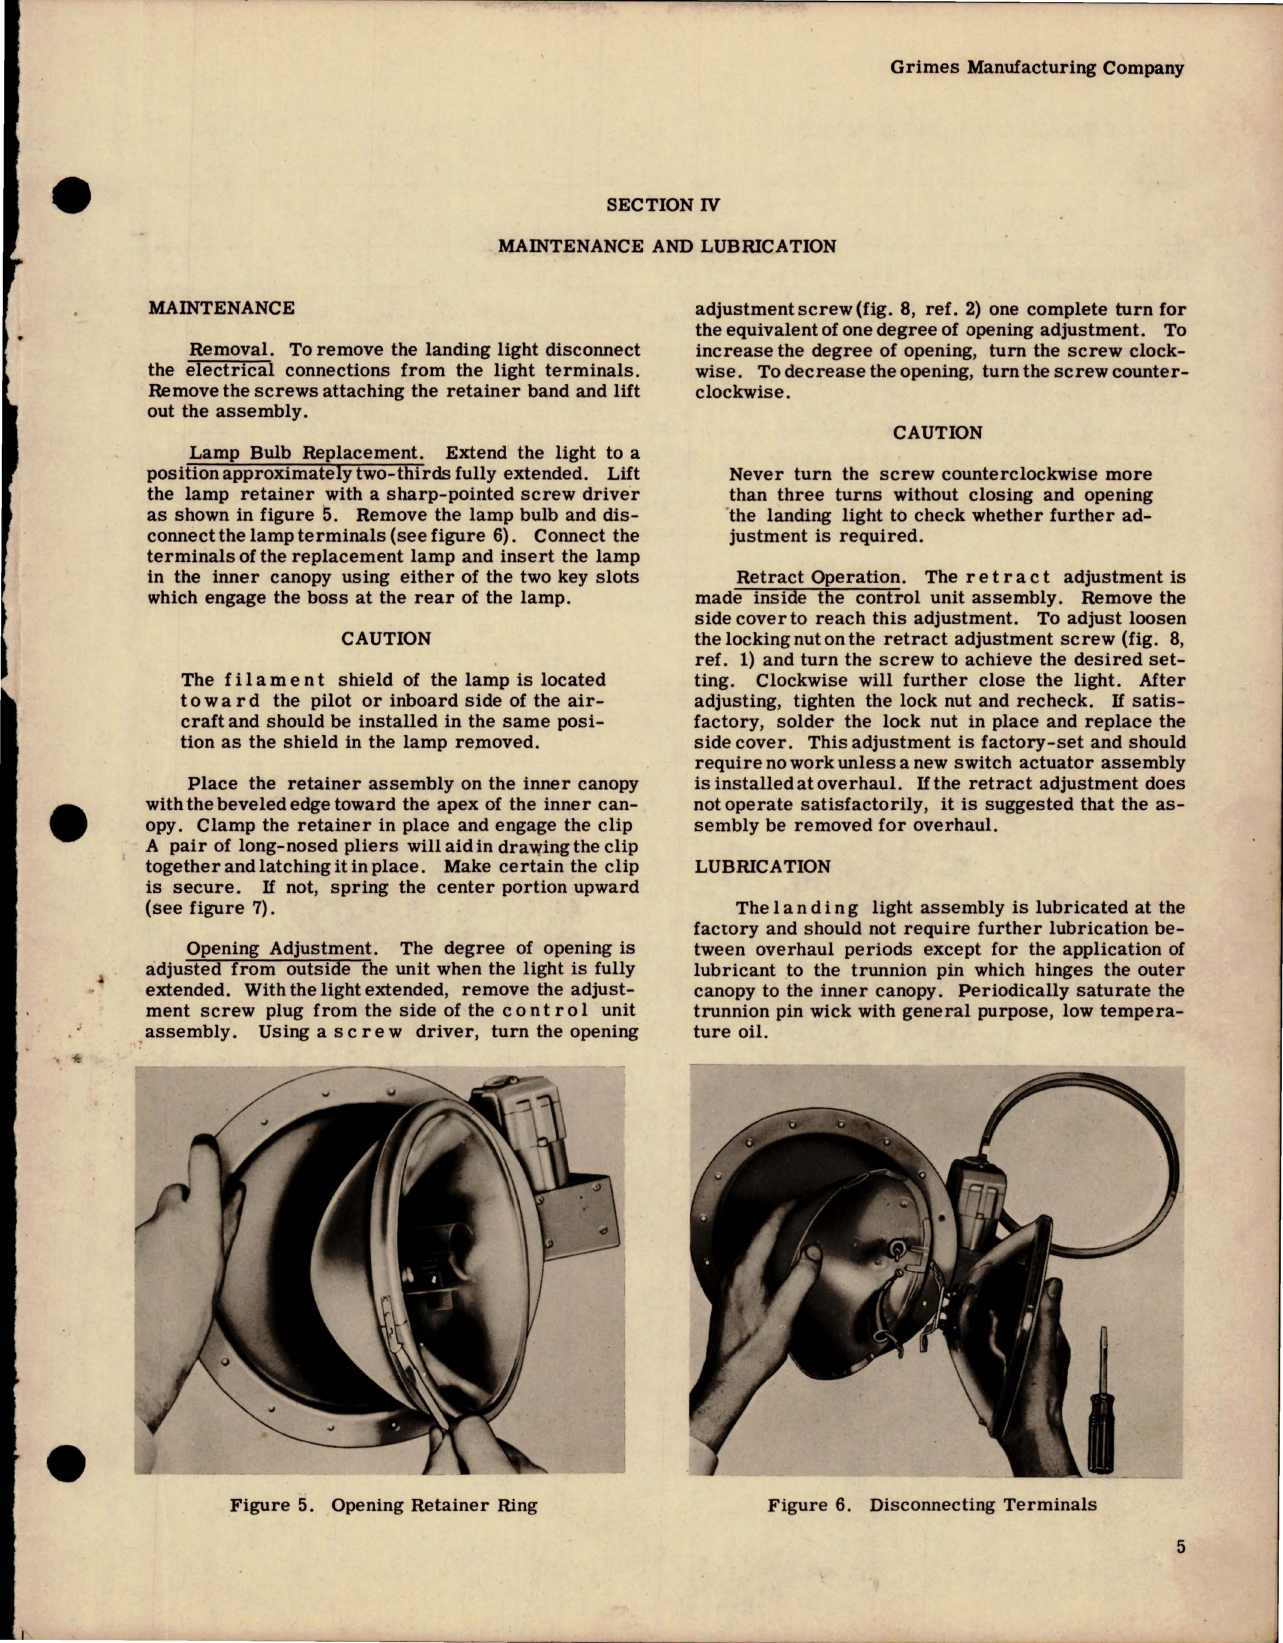 Sample page 9 from AirCorps Library document: Handbook of Instructions with Parts for Electrically Retractable Landing Light Assemblies - G-3800A Series